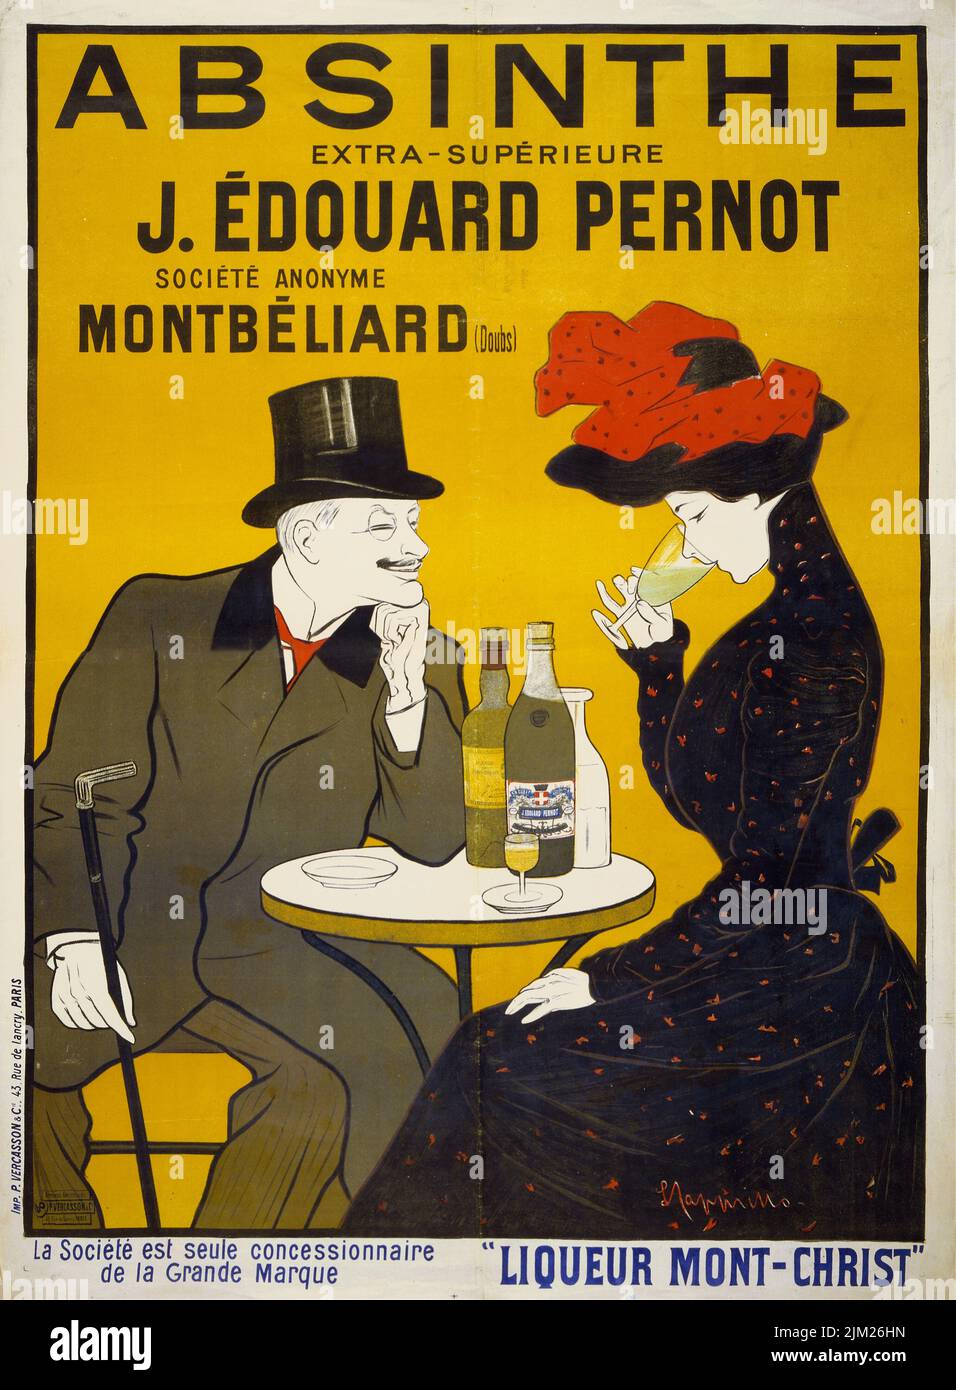 Absinthe extra-supérieure J. Édouard Pernot. Museum: PRIVATE COLLECTION. Author: LEONETTO CAPPIELLO. Stock Photo